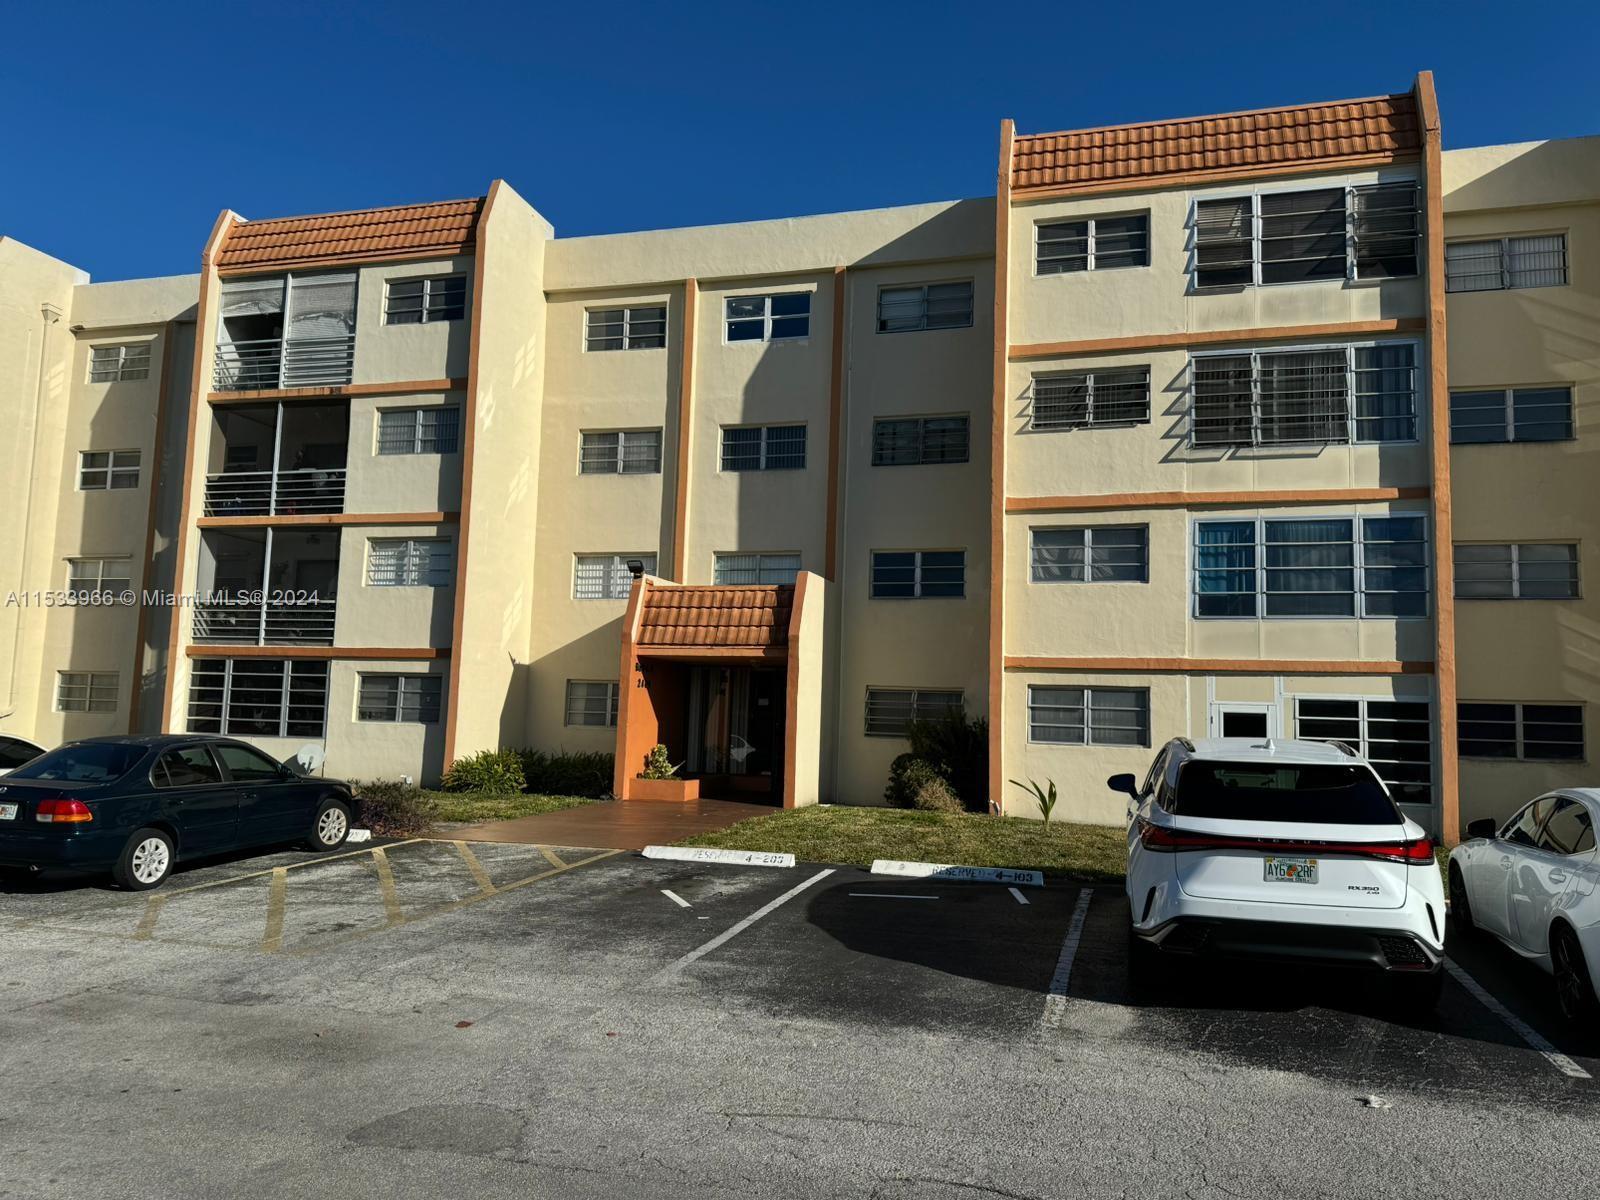 Photo of 2401 NW 41st Ave #205 in Lauderhill, FL